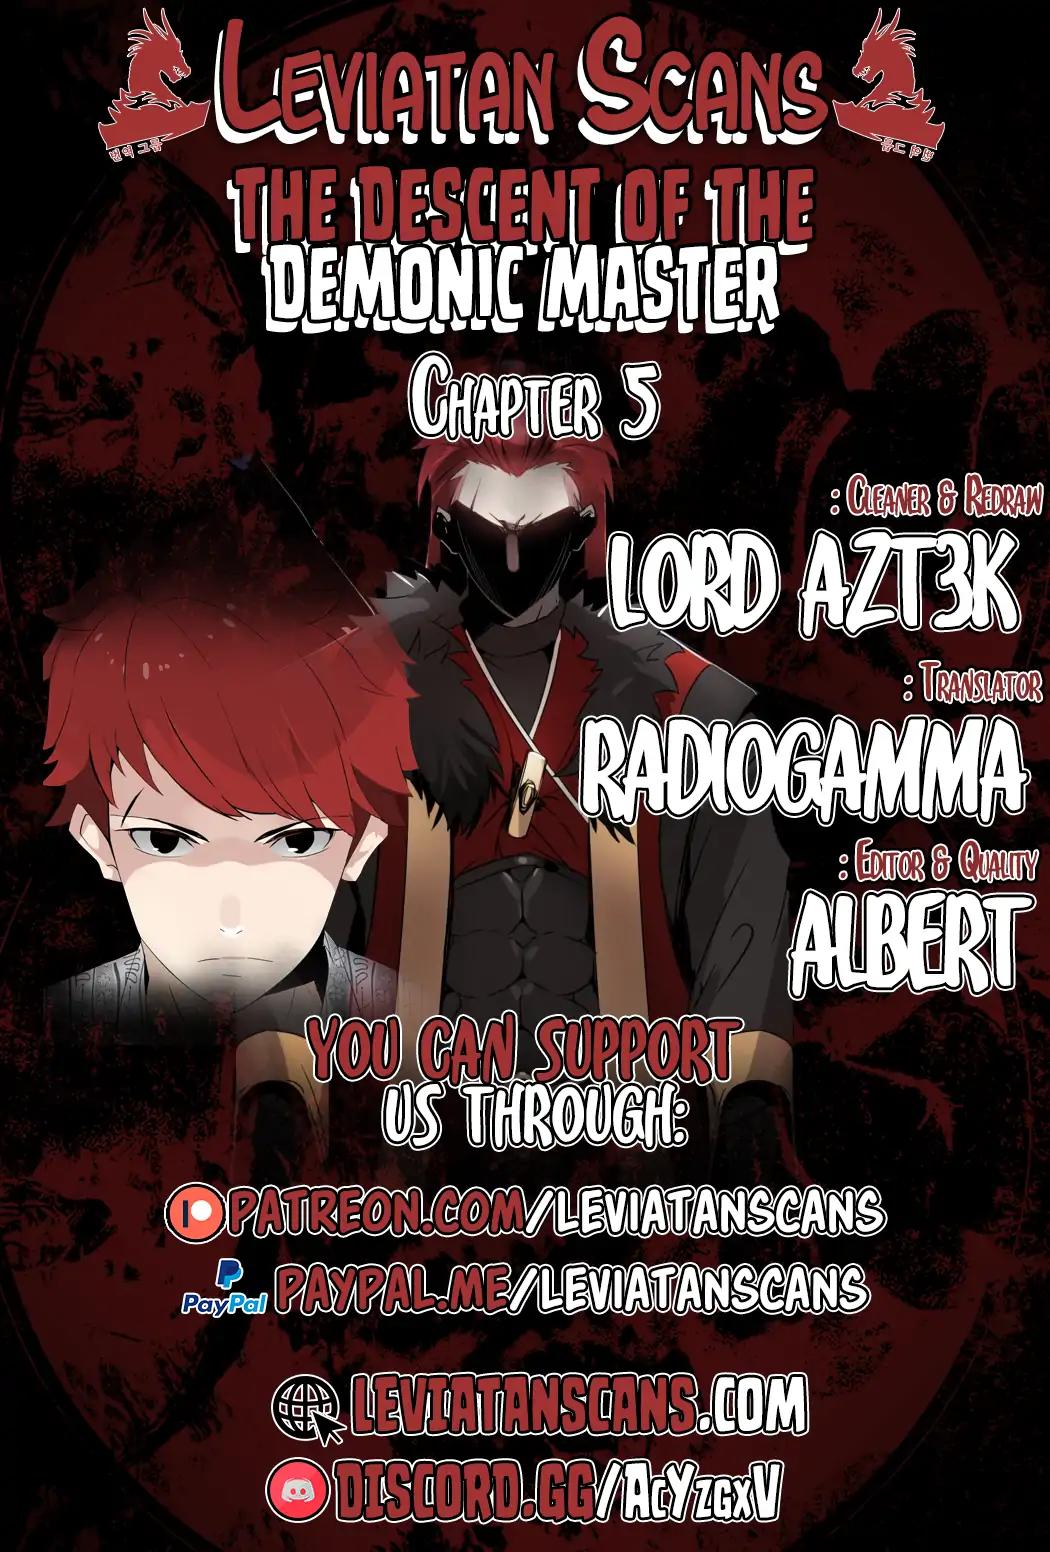 The Descent of the Demonic Master Chapter 5